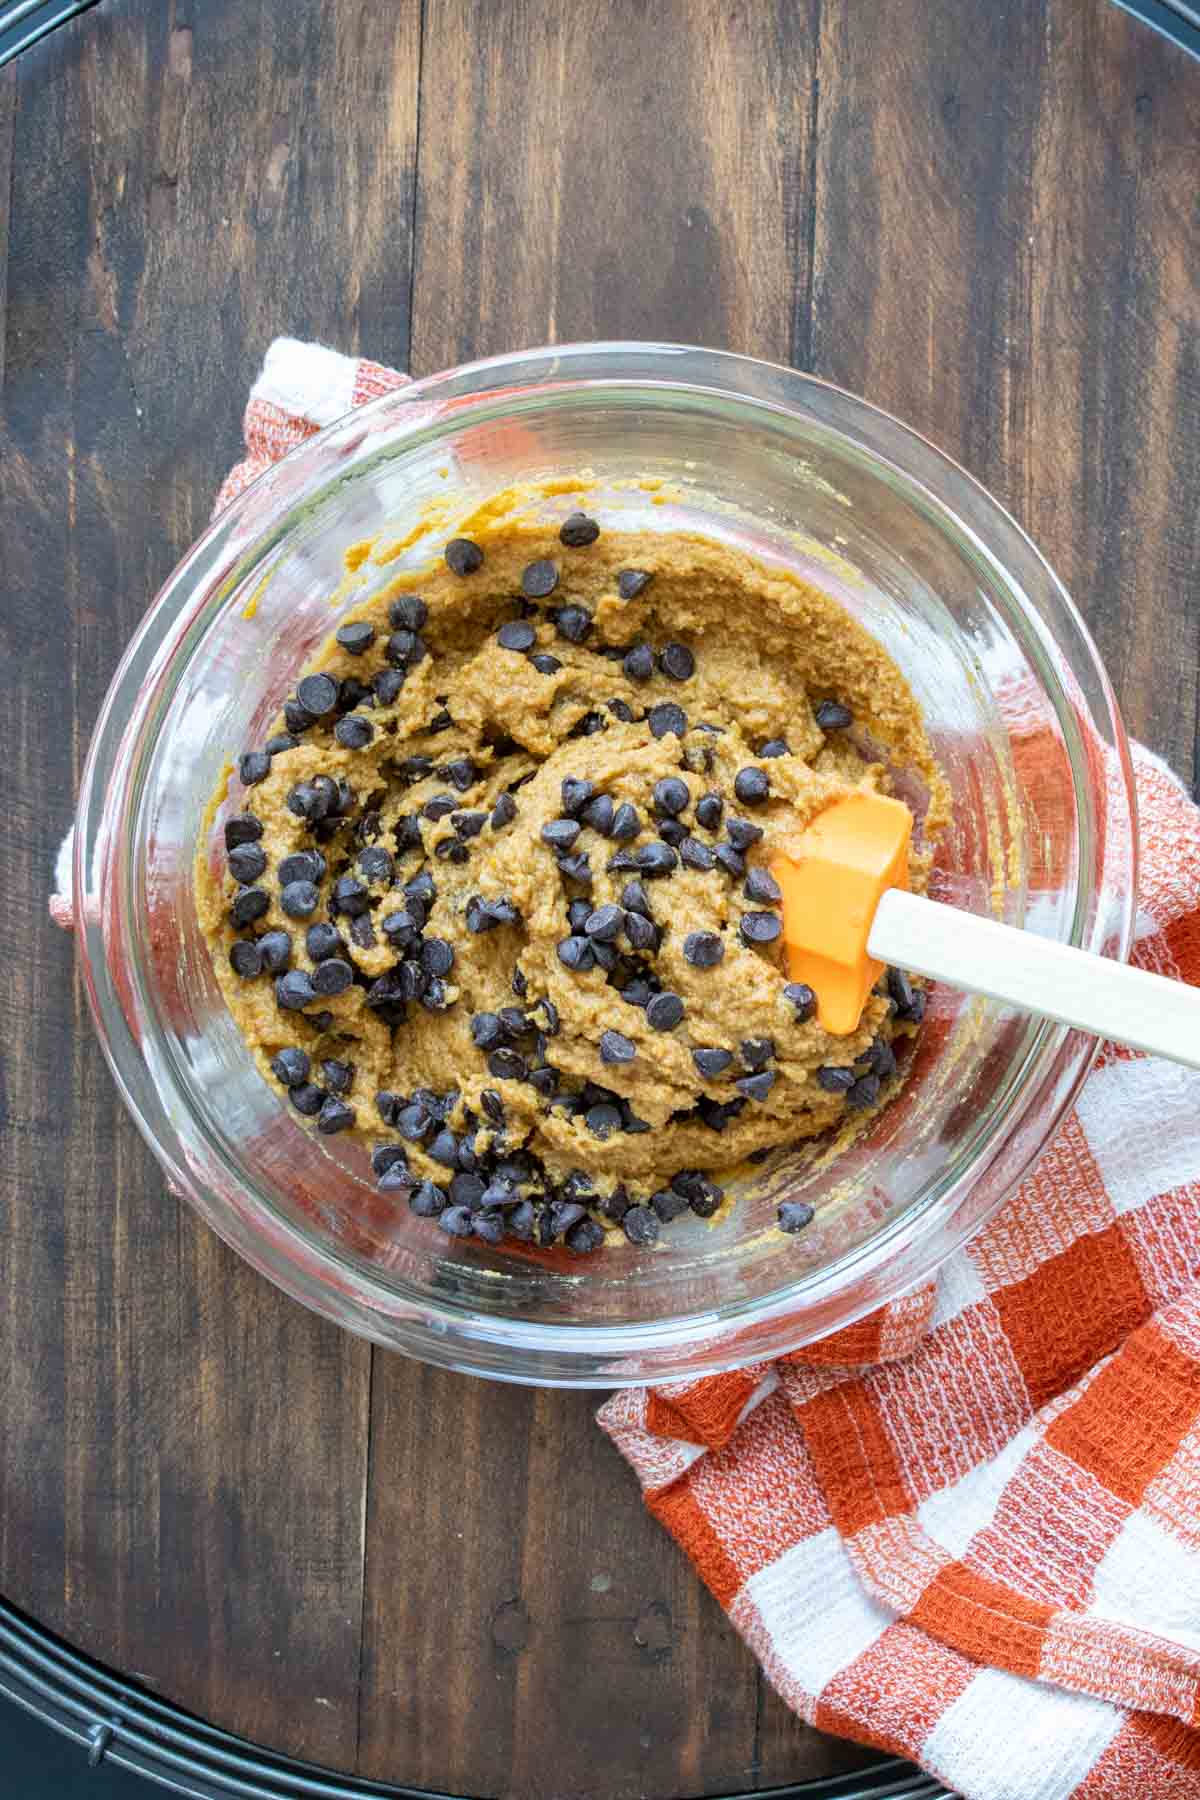 Chocolate chips being mixed into pumpkin cookie batter in a glass bowl